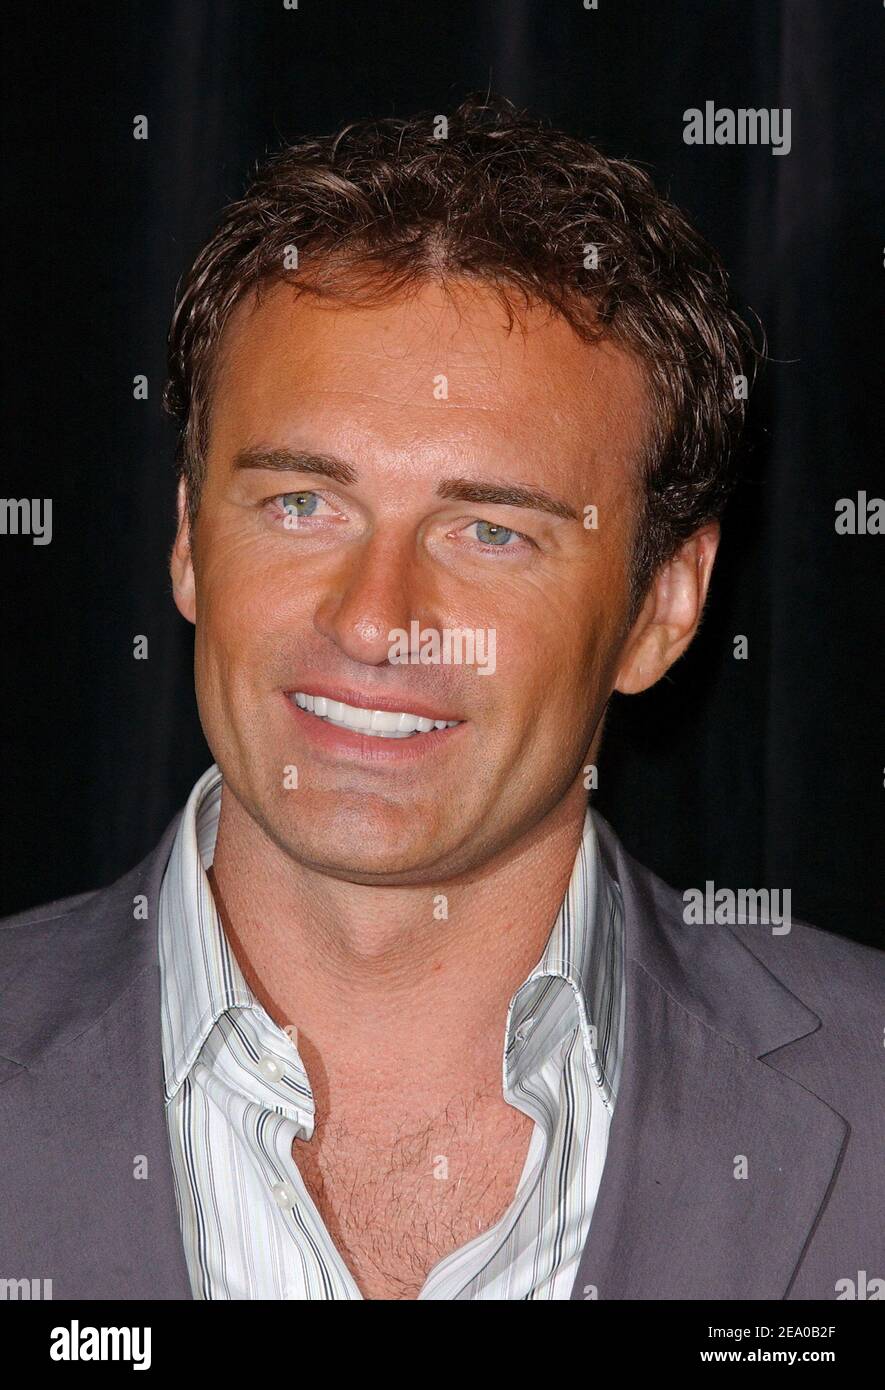 Julian McMahon attends the FOX Press Conference at the 2005 ShoWest. Las Vegas, March 17, 2005. Photo by Lionel Hahn/ABACA Stock Photo